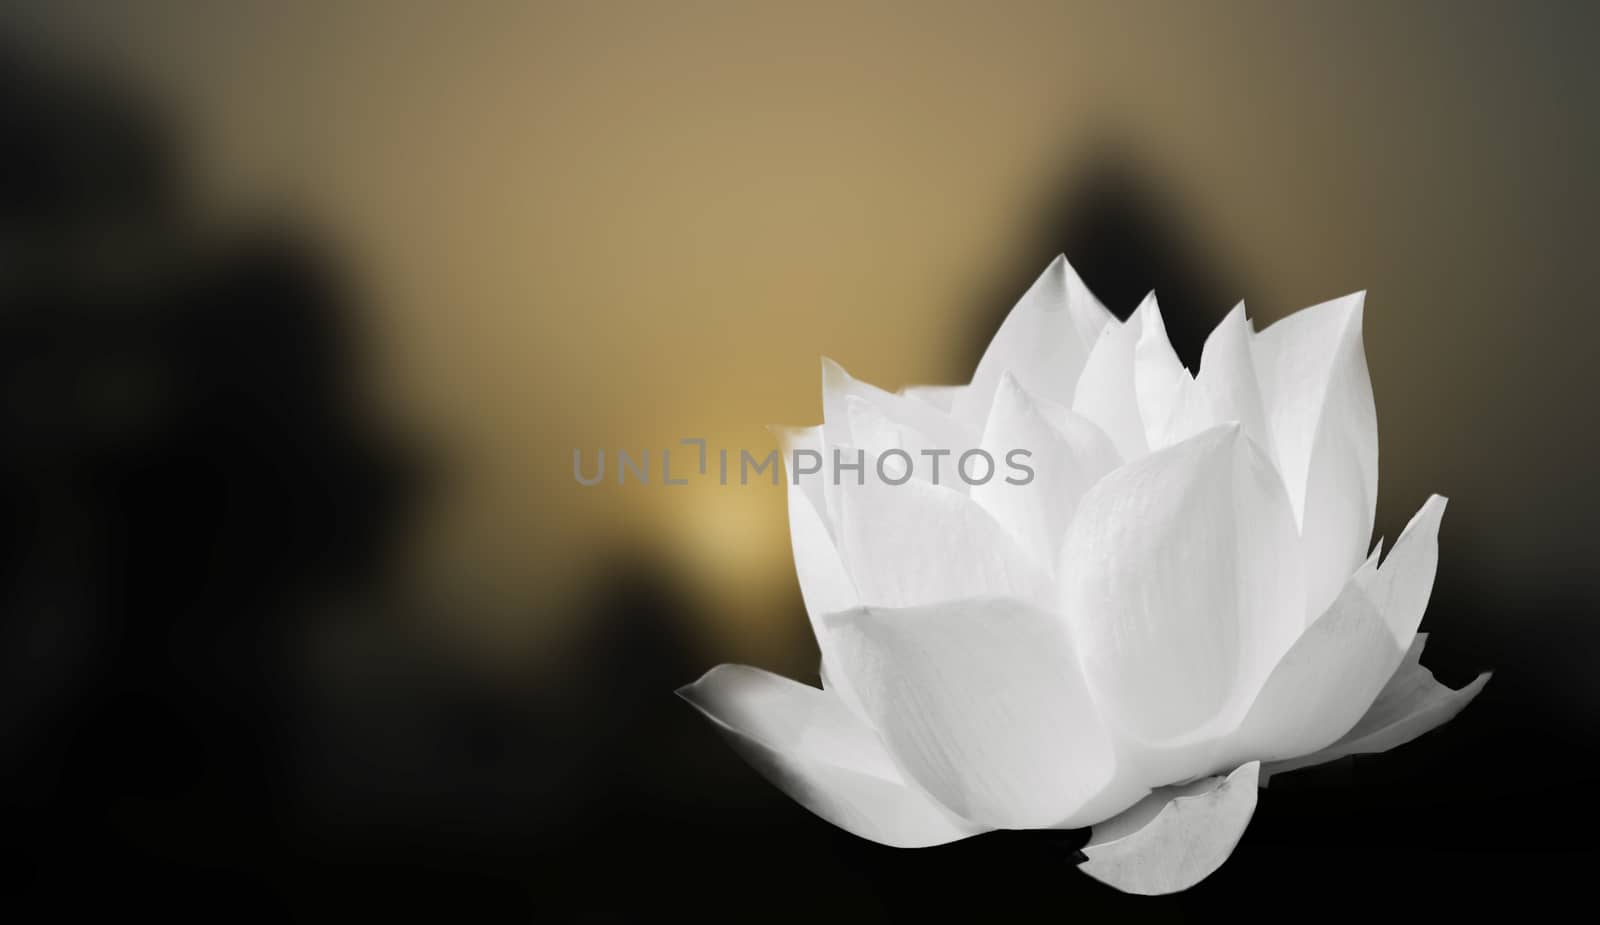 The White Lotus on the blur background.